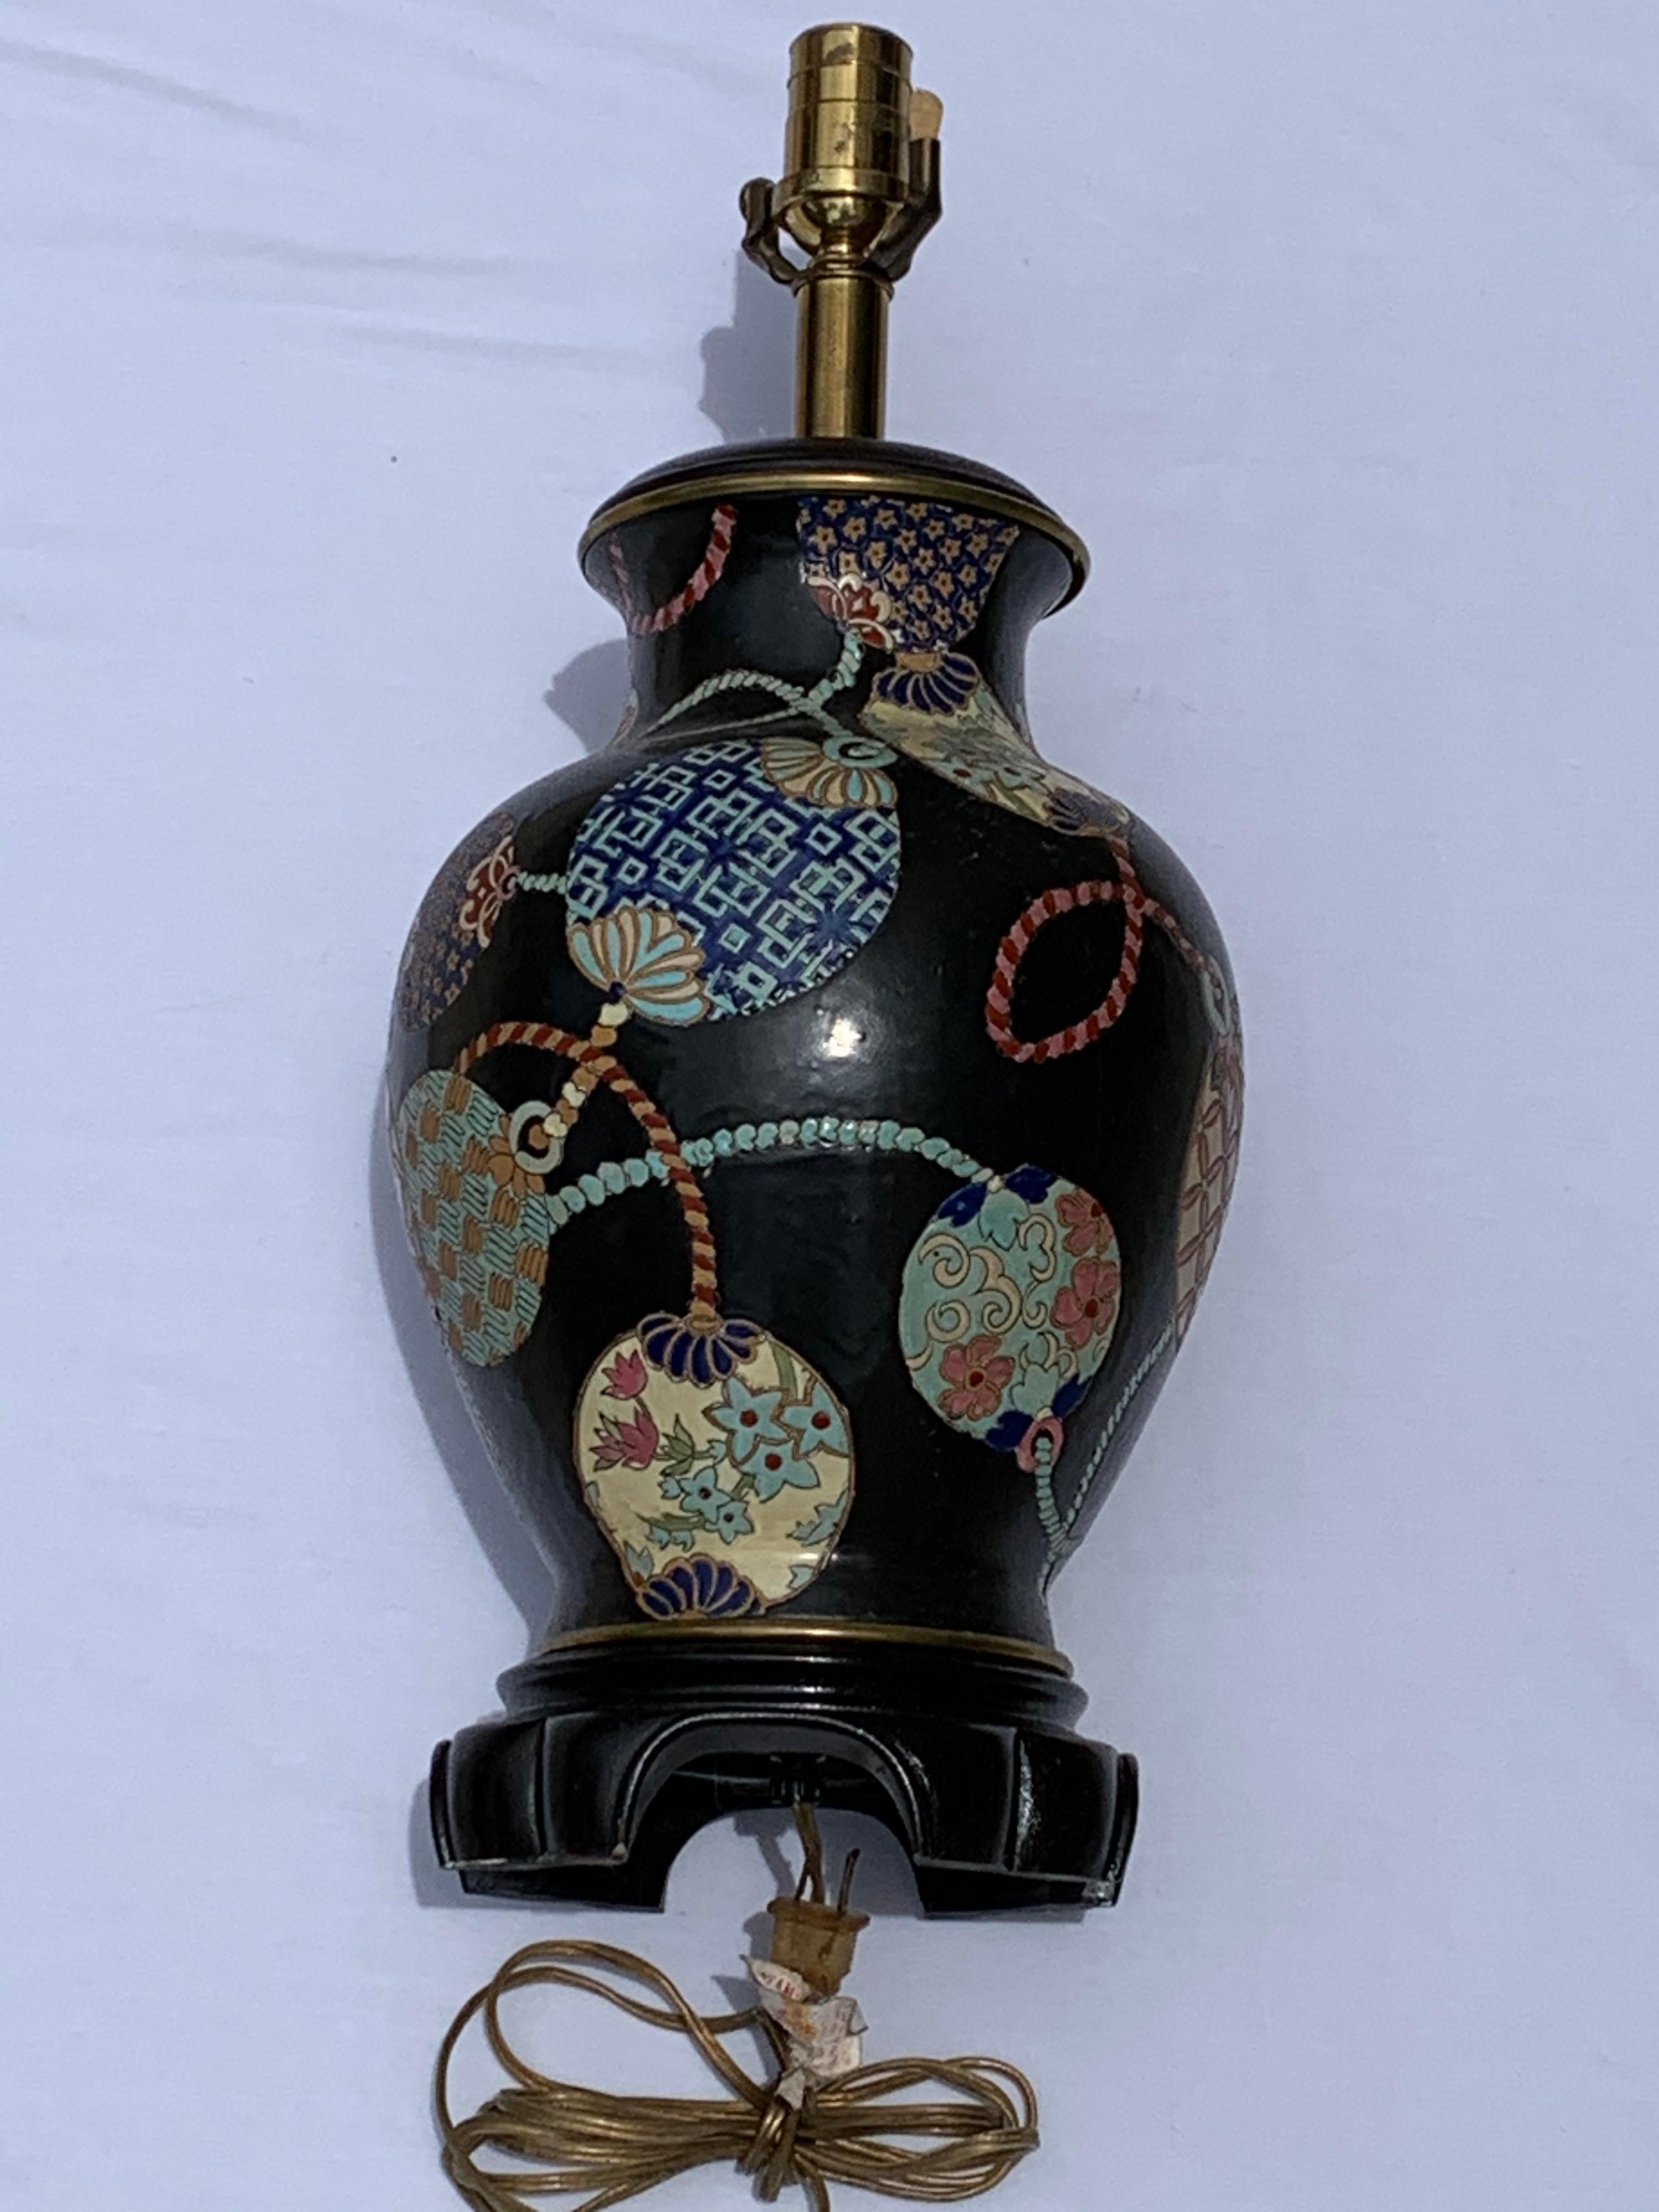 Decorative vintage Chinese table lamp made of ceramic, hand painted with colorful geometric and floral motifs all around on black background. One 150/watt maximum light, mounted on elegant base, shade is not included.
Measures: Height of the lamp